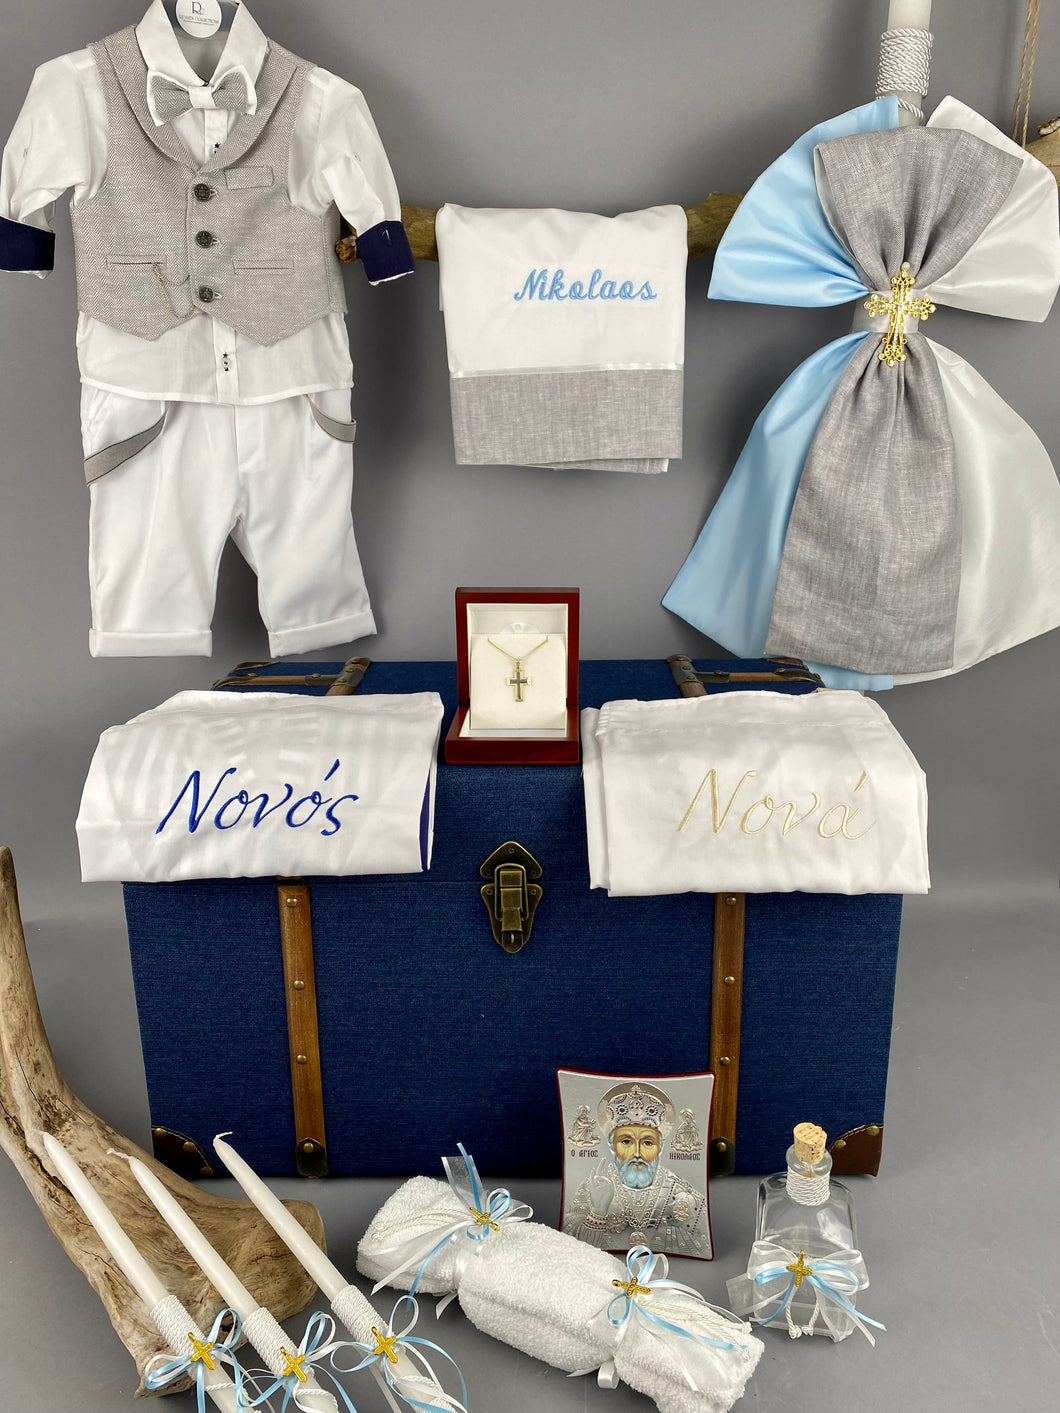 Baptism Package Grey with Navy Blue and Light Blue Accents, Triantos Gold Cross, Nona and Nono Aprons, Treasure Chest BBP4